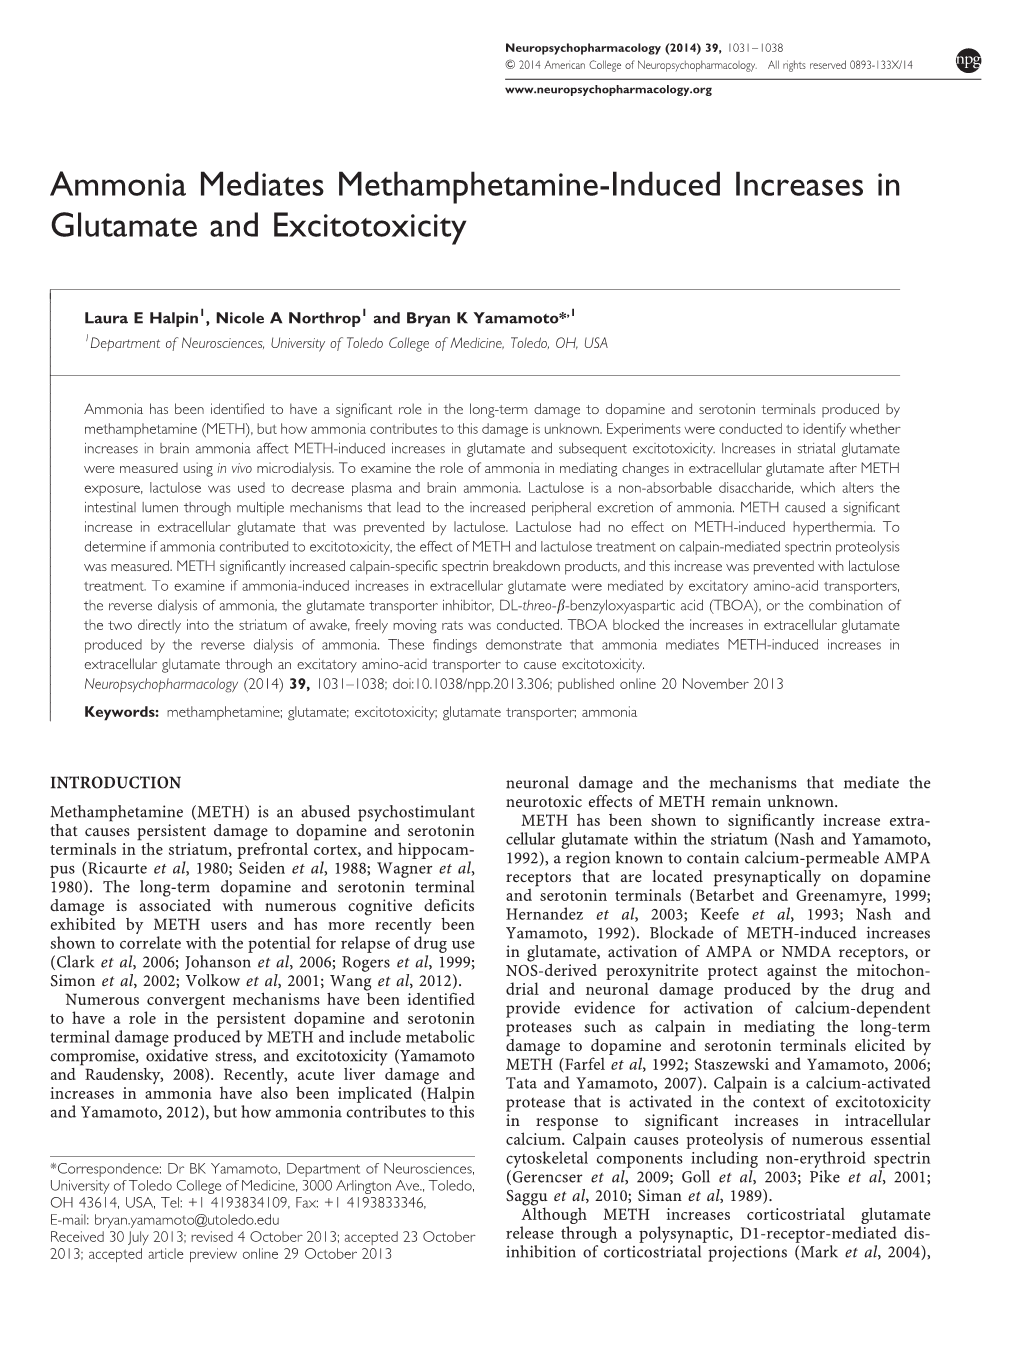 Ammonia Mediates Methamphetamine-Induced Increases in Glutamate and Excitotoxicity